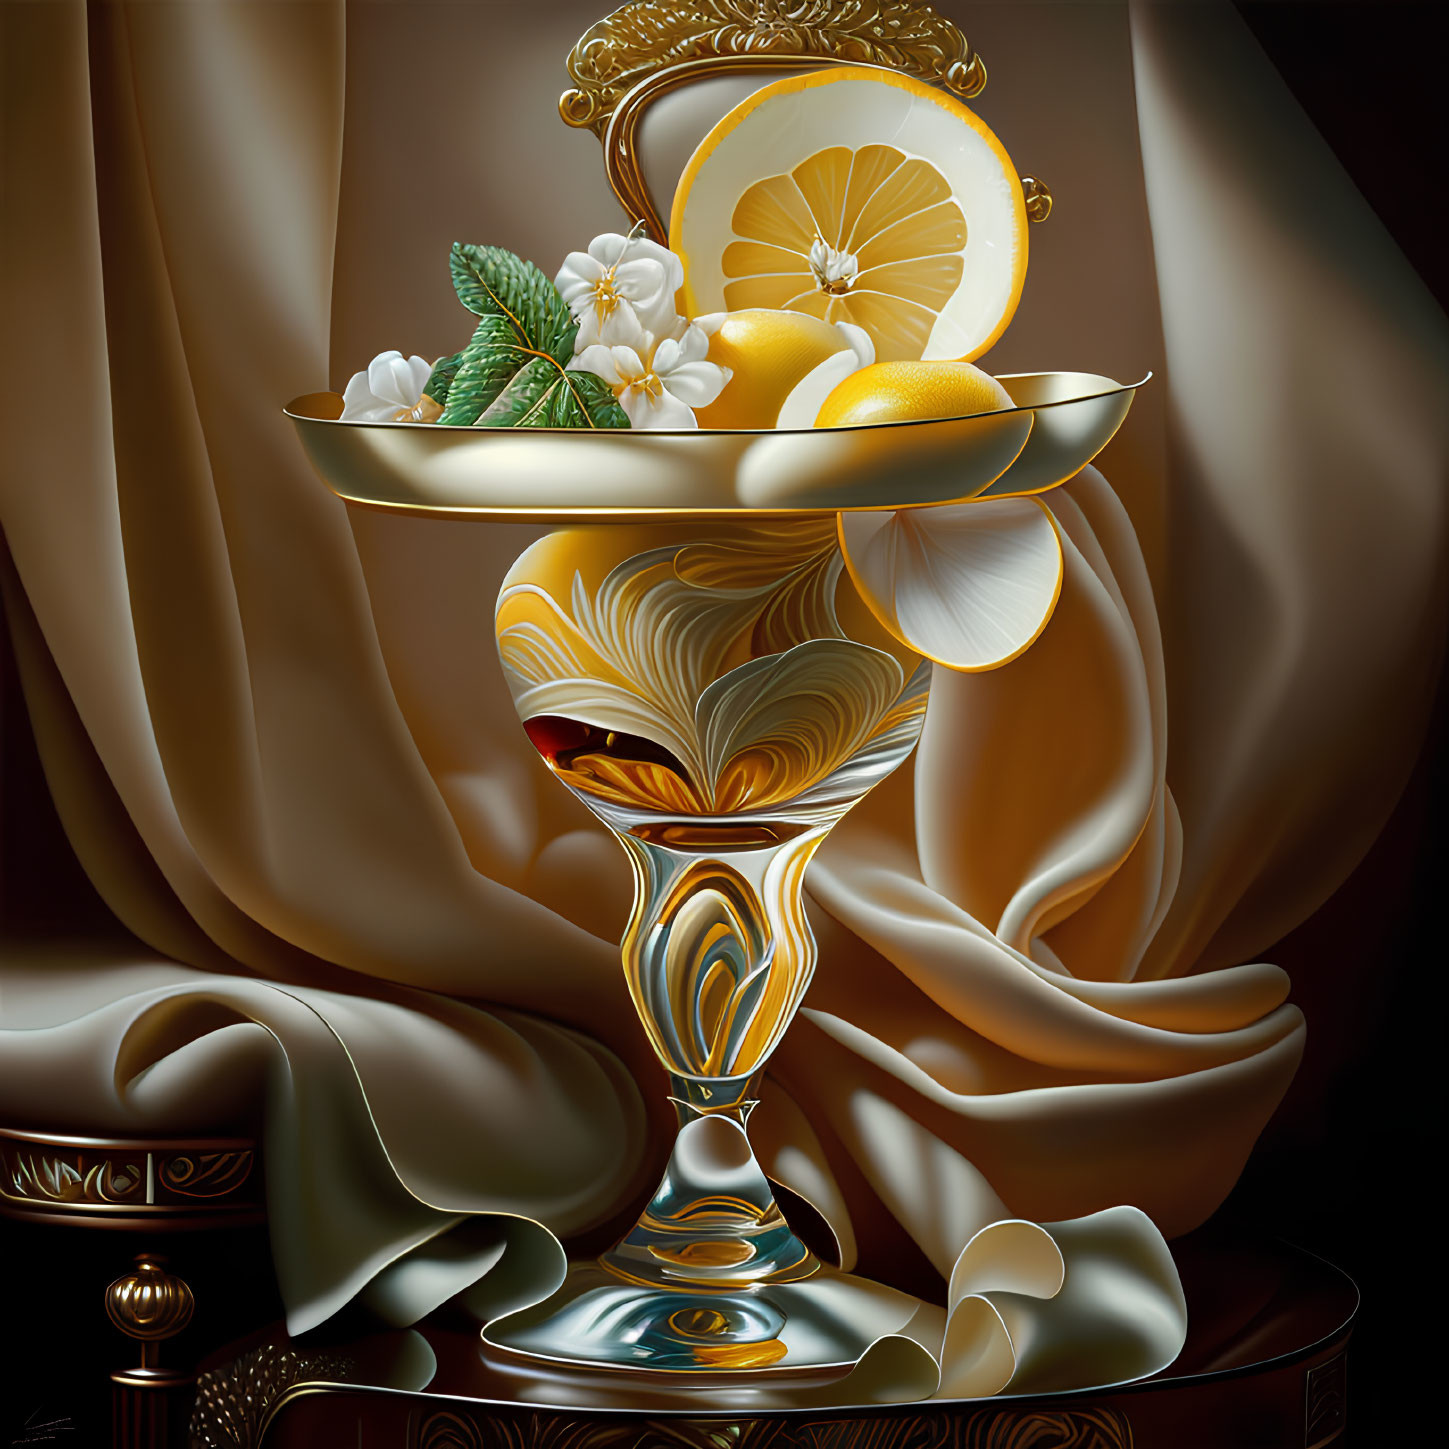 Golden pedestal bowl with lemons and white flowers on glossy surface